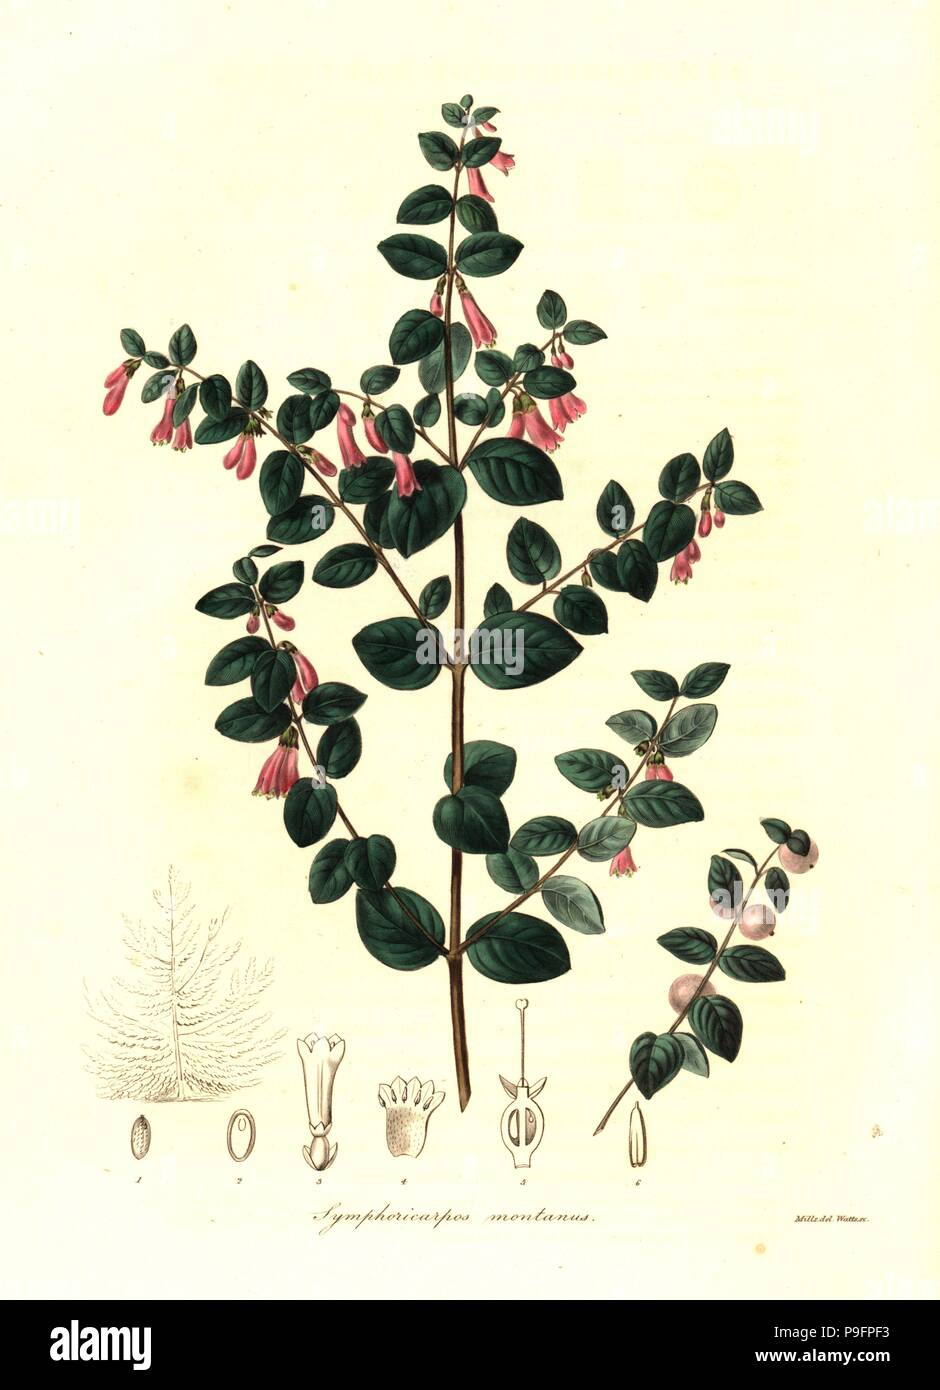 Pink snowberry, Symphoricarpos microphyllus (Mountain St. Peter's wort, Symphoricarpos montanus). Handcoloured copperplate engraving by Watts after a botanical illustration by Mills from Benjamin Maund and the Rev. John Stevens Henslow's The Botanist, London, 1836. Stock Photo